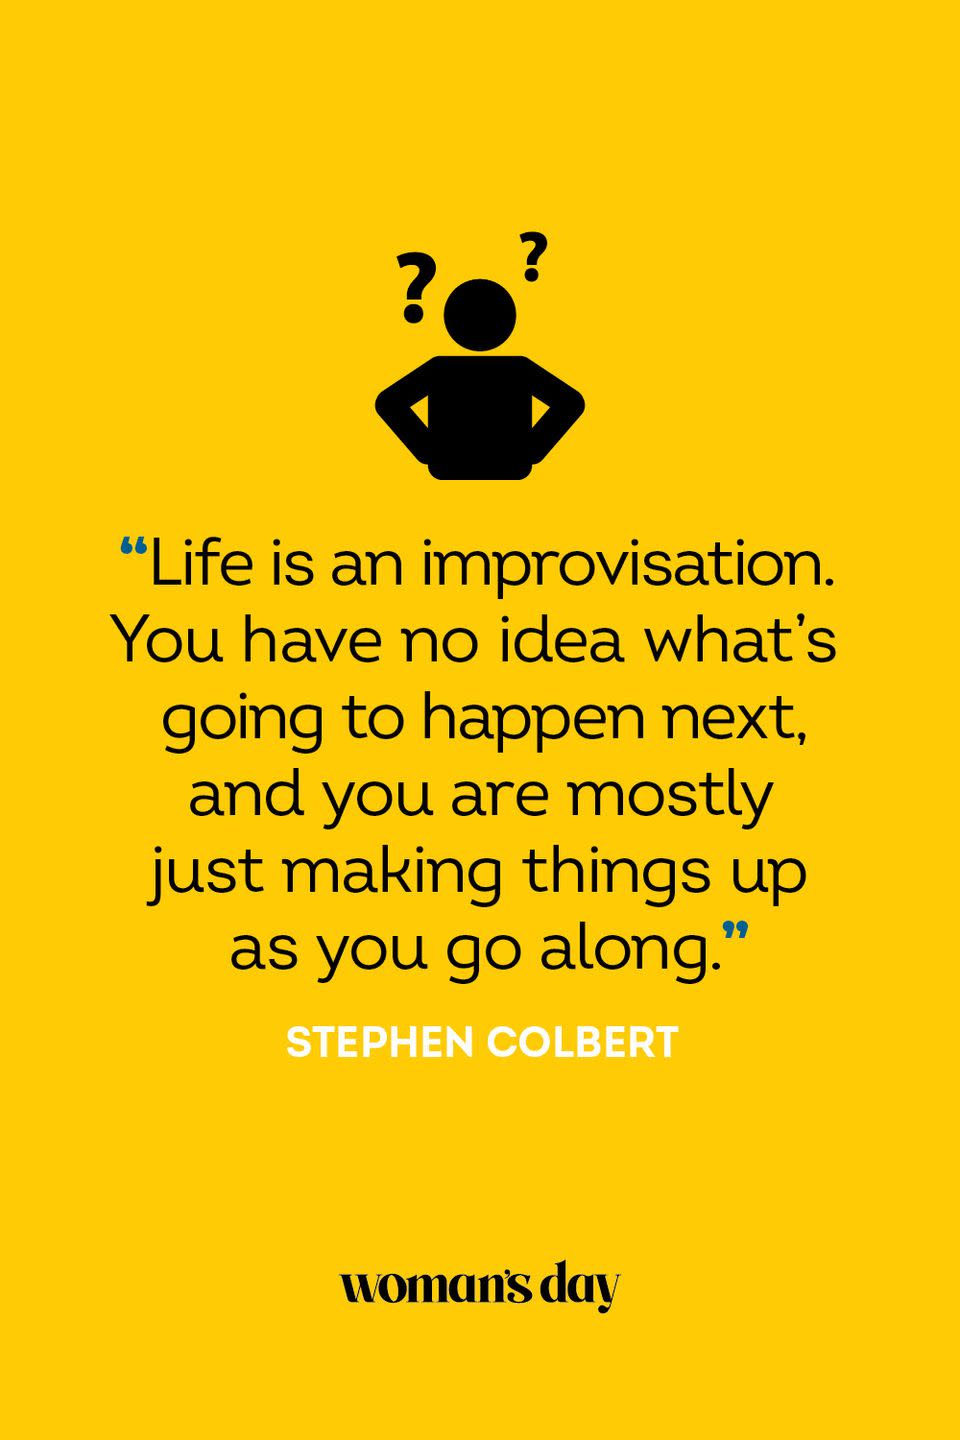 <p>"Life is an improvisation. You have no idea what’s going to happen next, and you are mostly just making things up as you go along."</p>